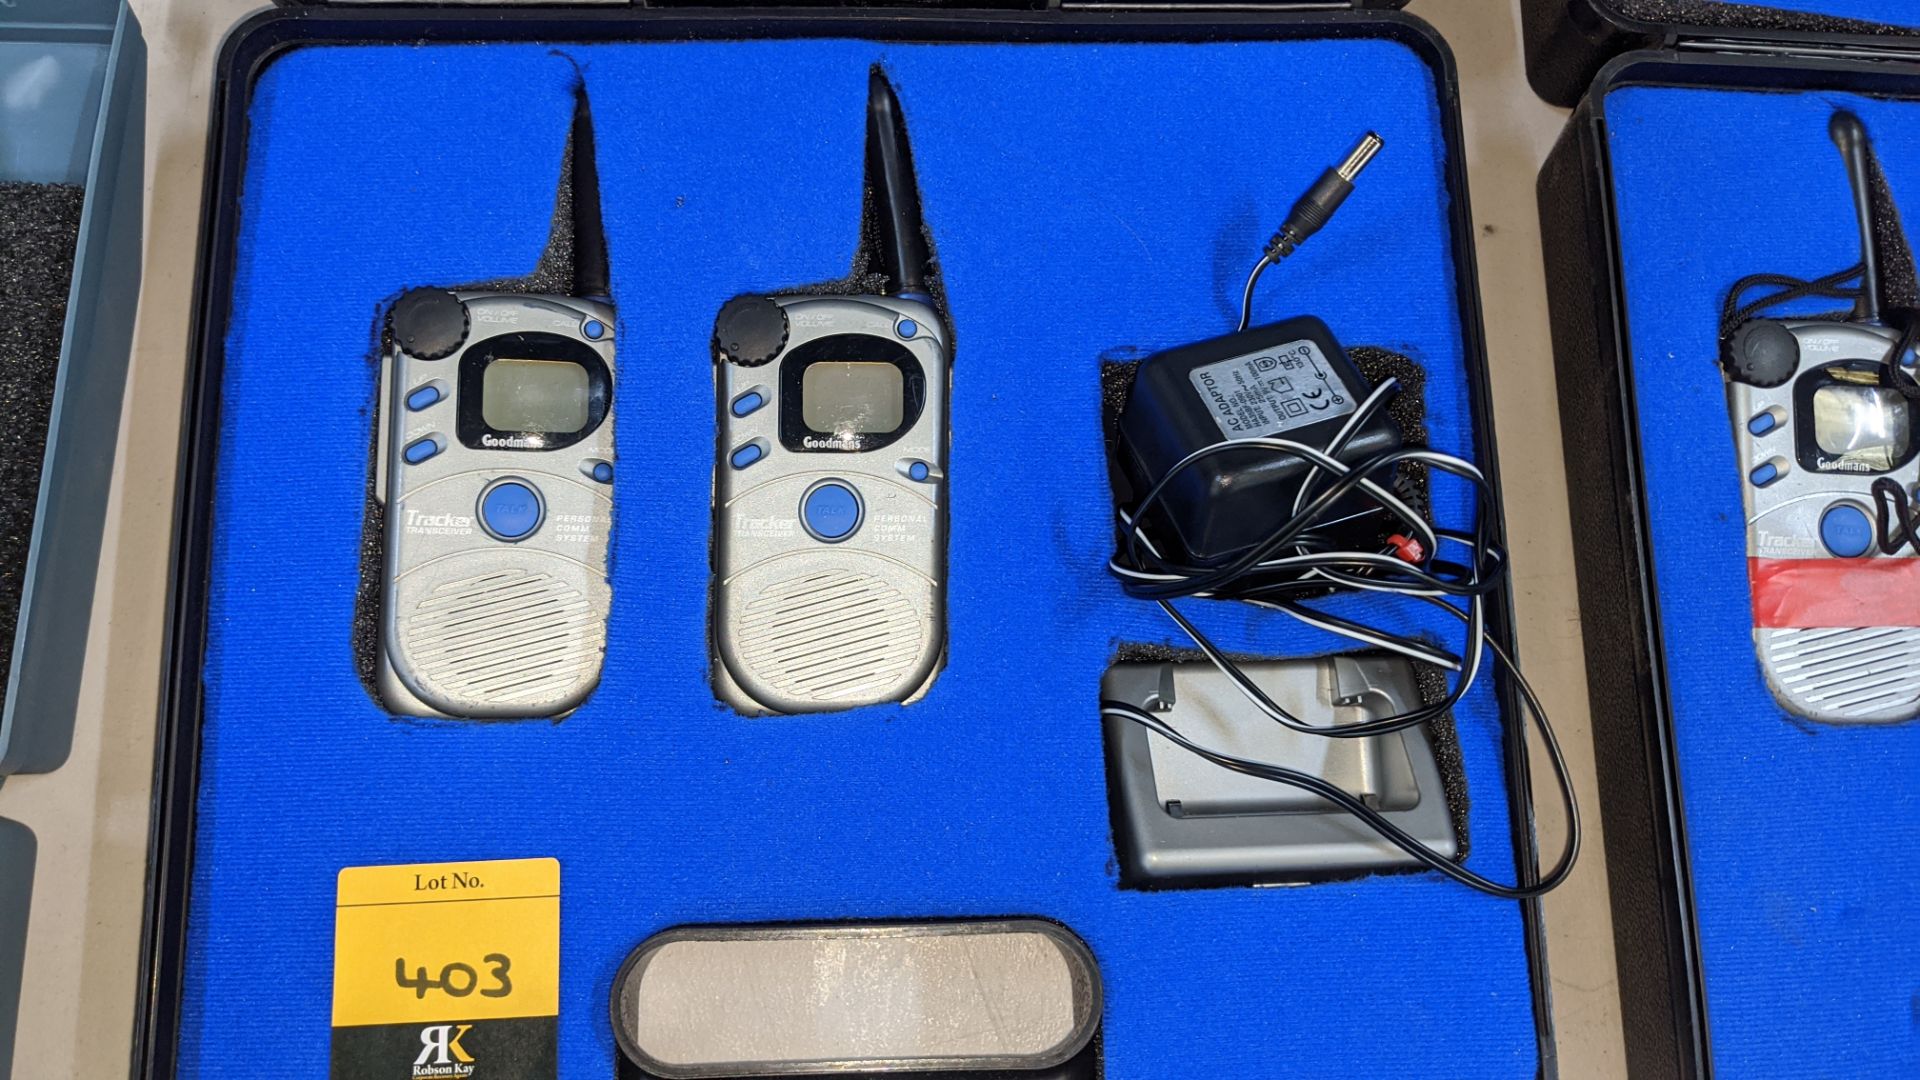 2 off twin walkie talkie packs including charging equipment & cases as pictured Lots 51 - 480 - Image 3 of 4